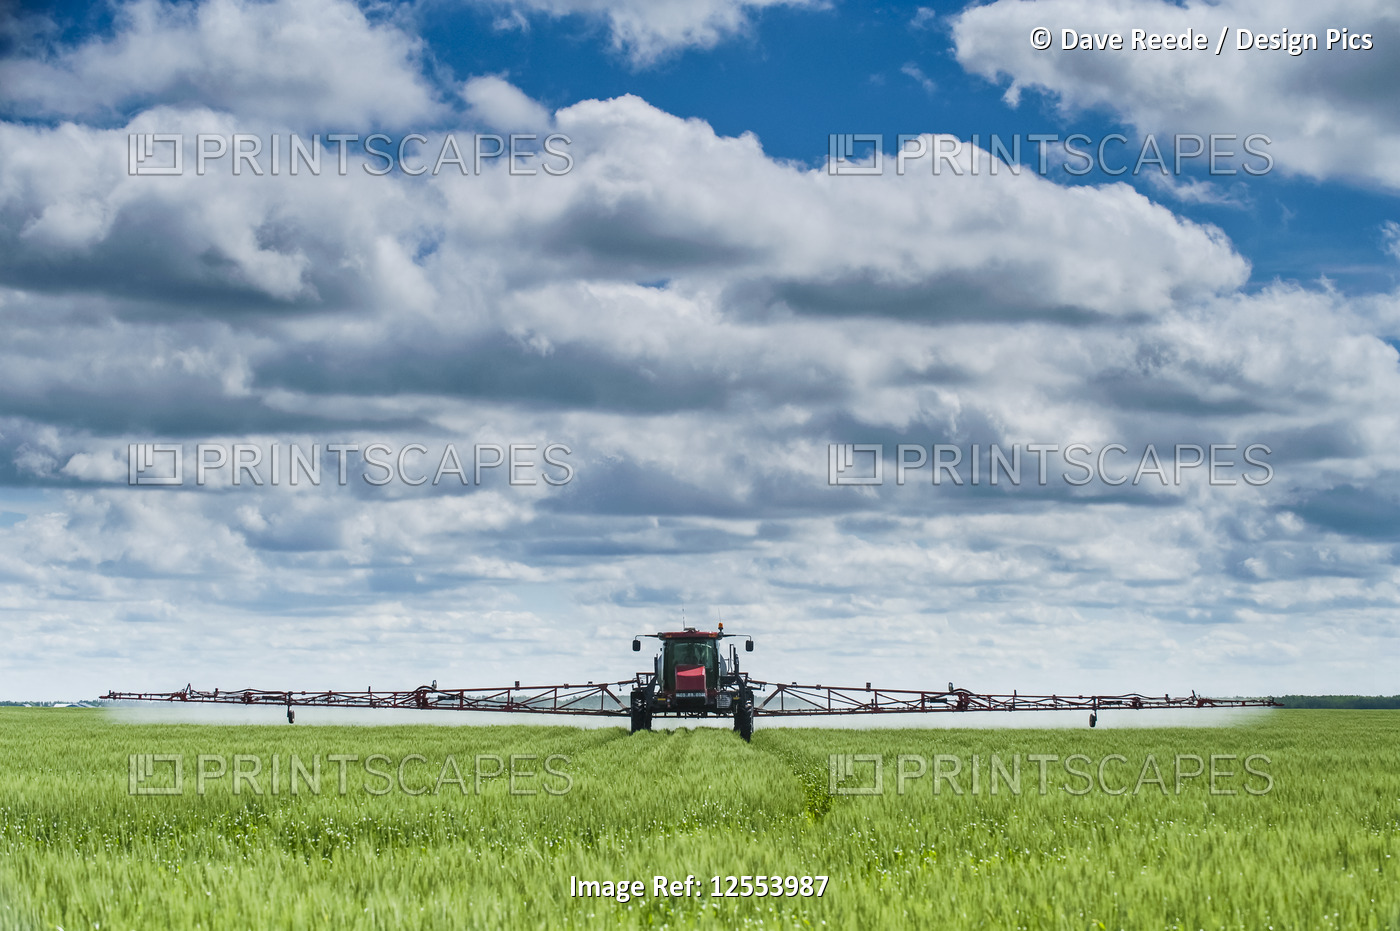 A high clearance sprayer gives a ground chemical application of fungicide to ...